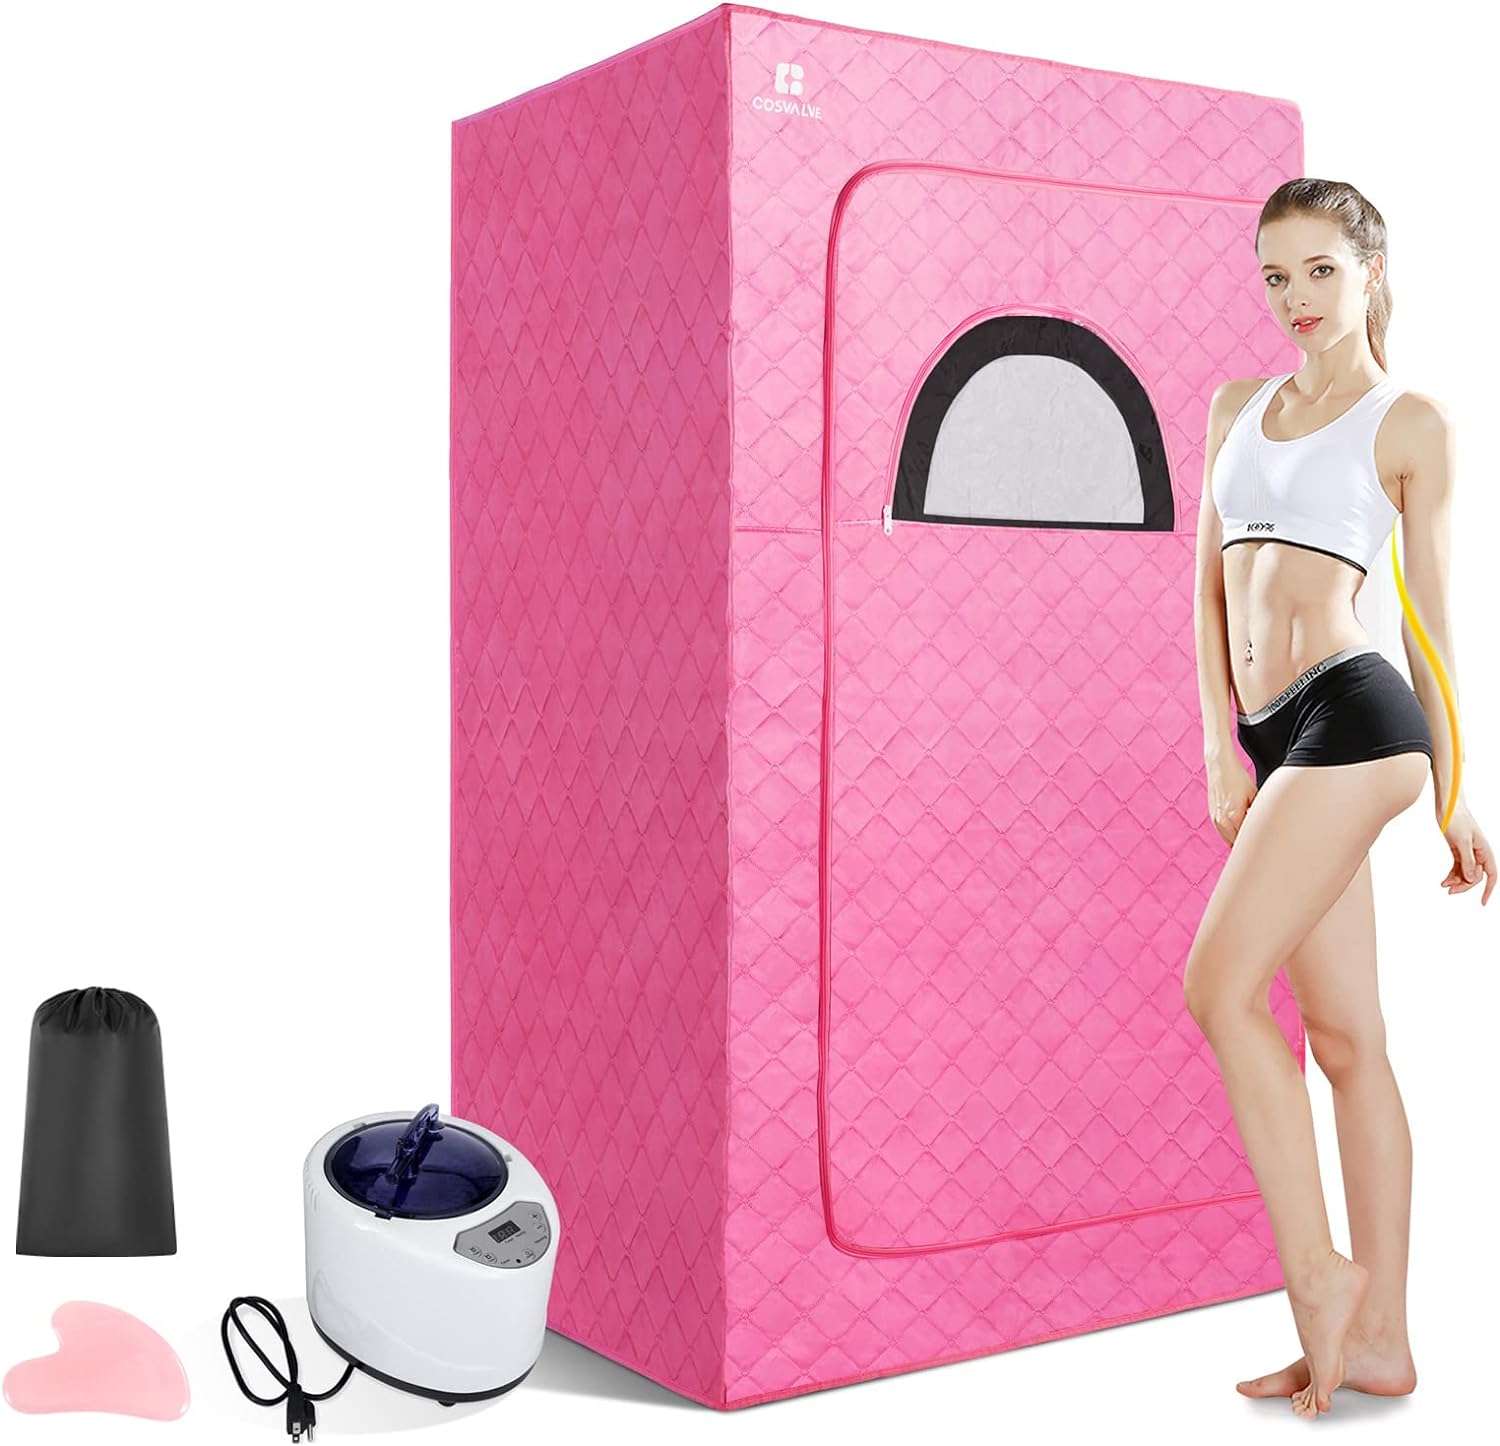 COSVALVE Full Size Personal Steam Sauna for Home Spa 2.6L & 1000 W Steam Generator, Lightweight Portable Sauna Tent with Remote Control, Indoor Steam Room for Relaxation